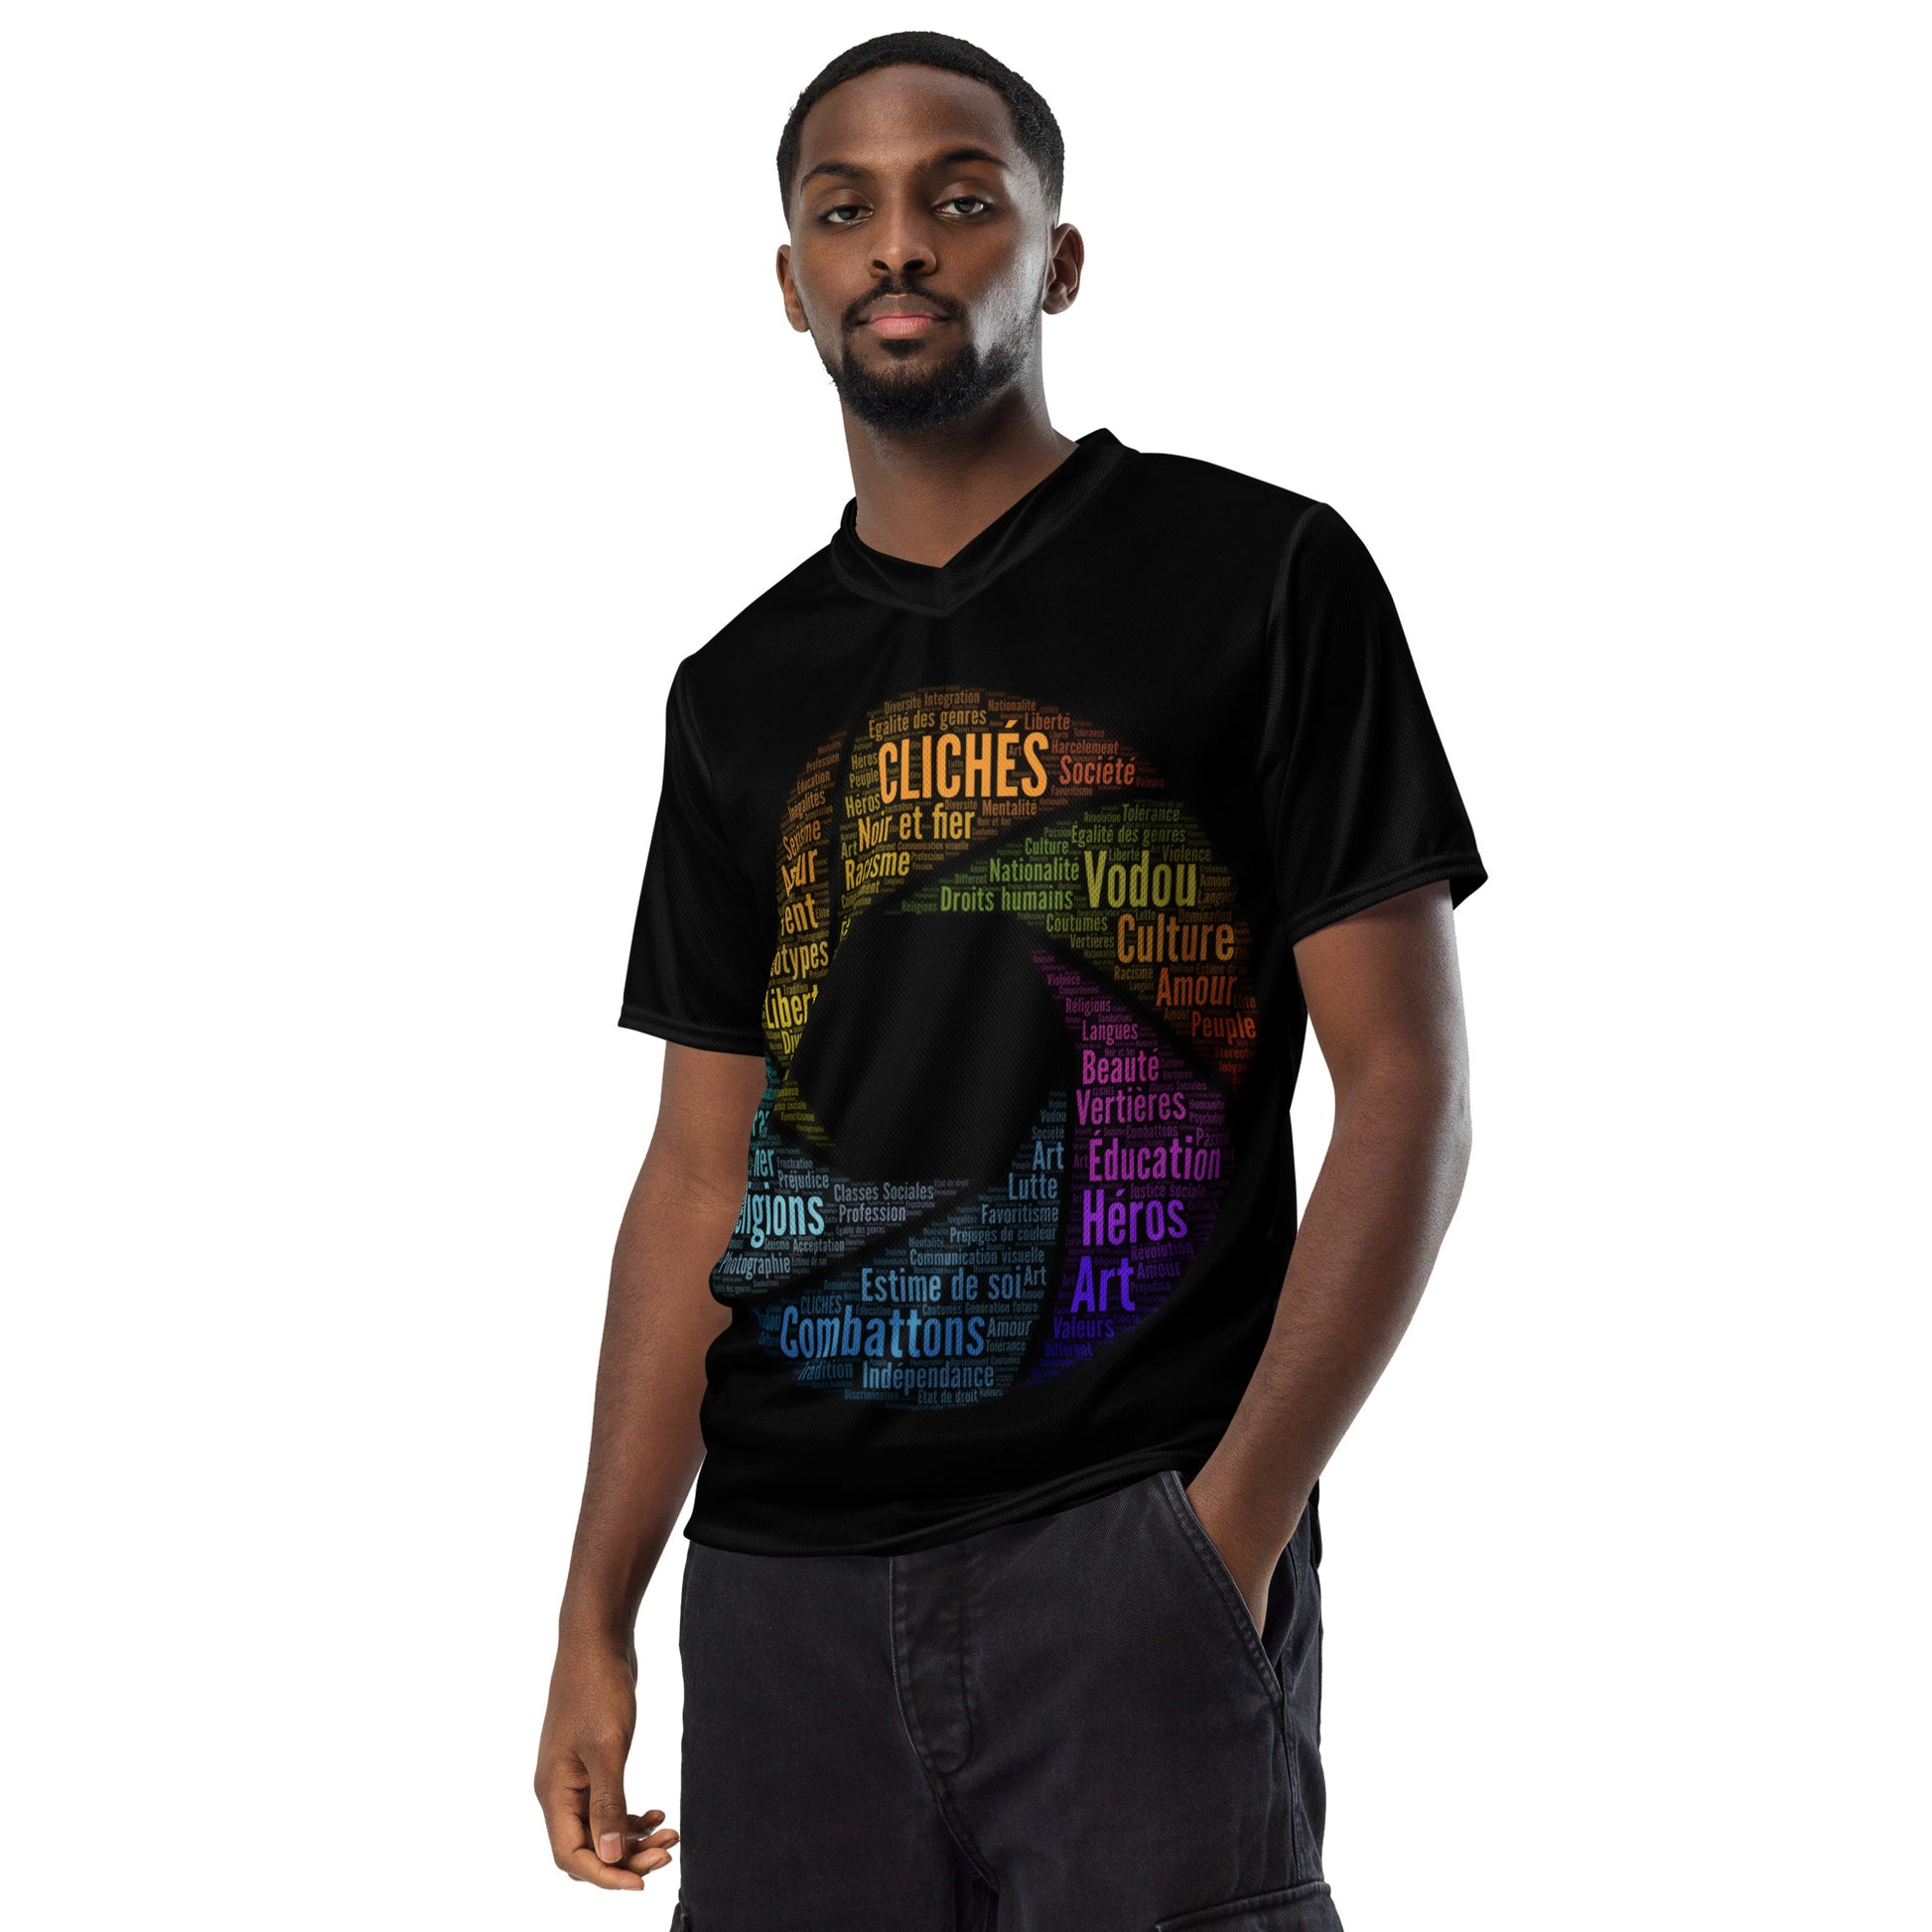 Stereotypes-photography-Gender equality-creativity-word cloud-motivation-patriotism-black and proud-unisex jersey